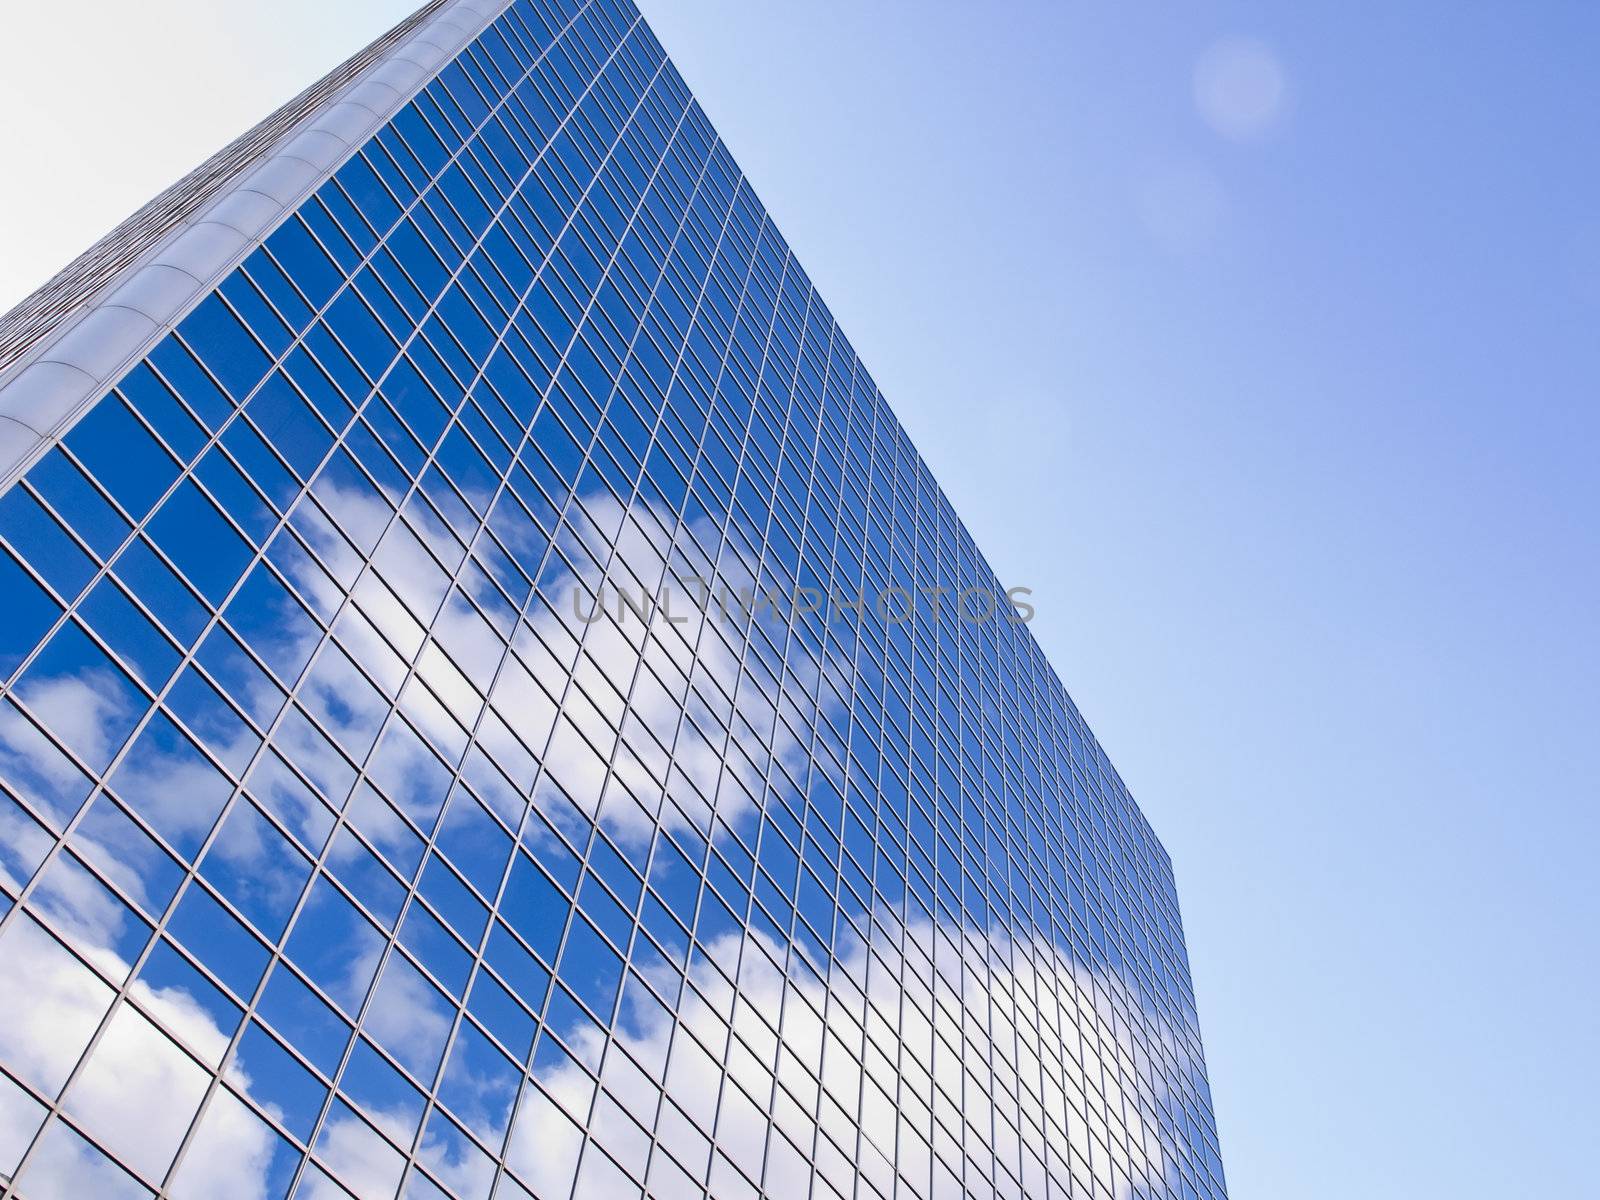 A reflection of clouds in a brilliant blue tower.